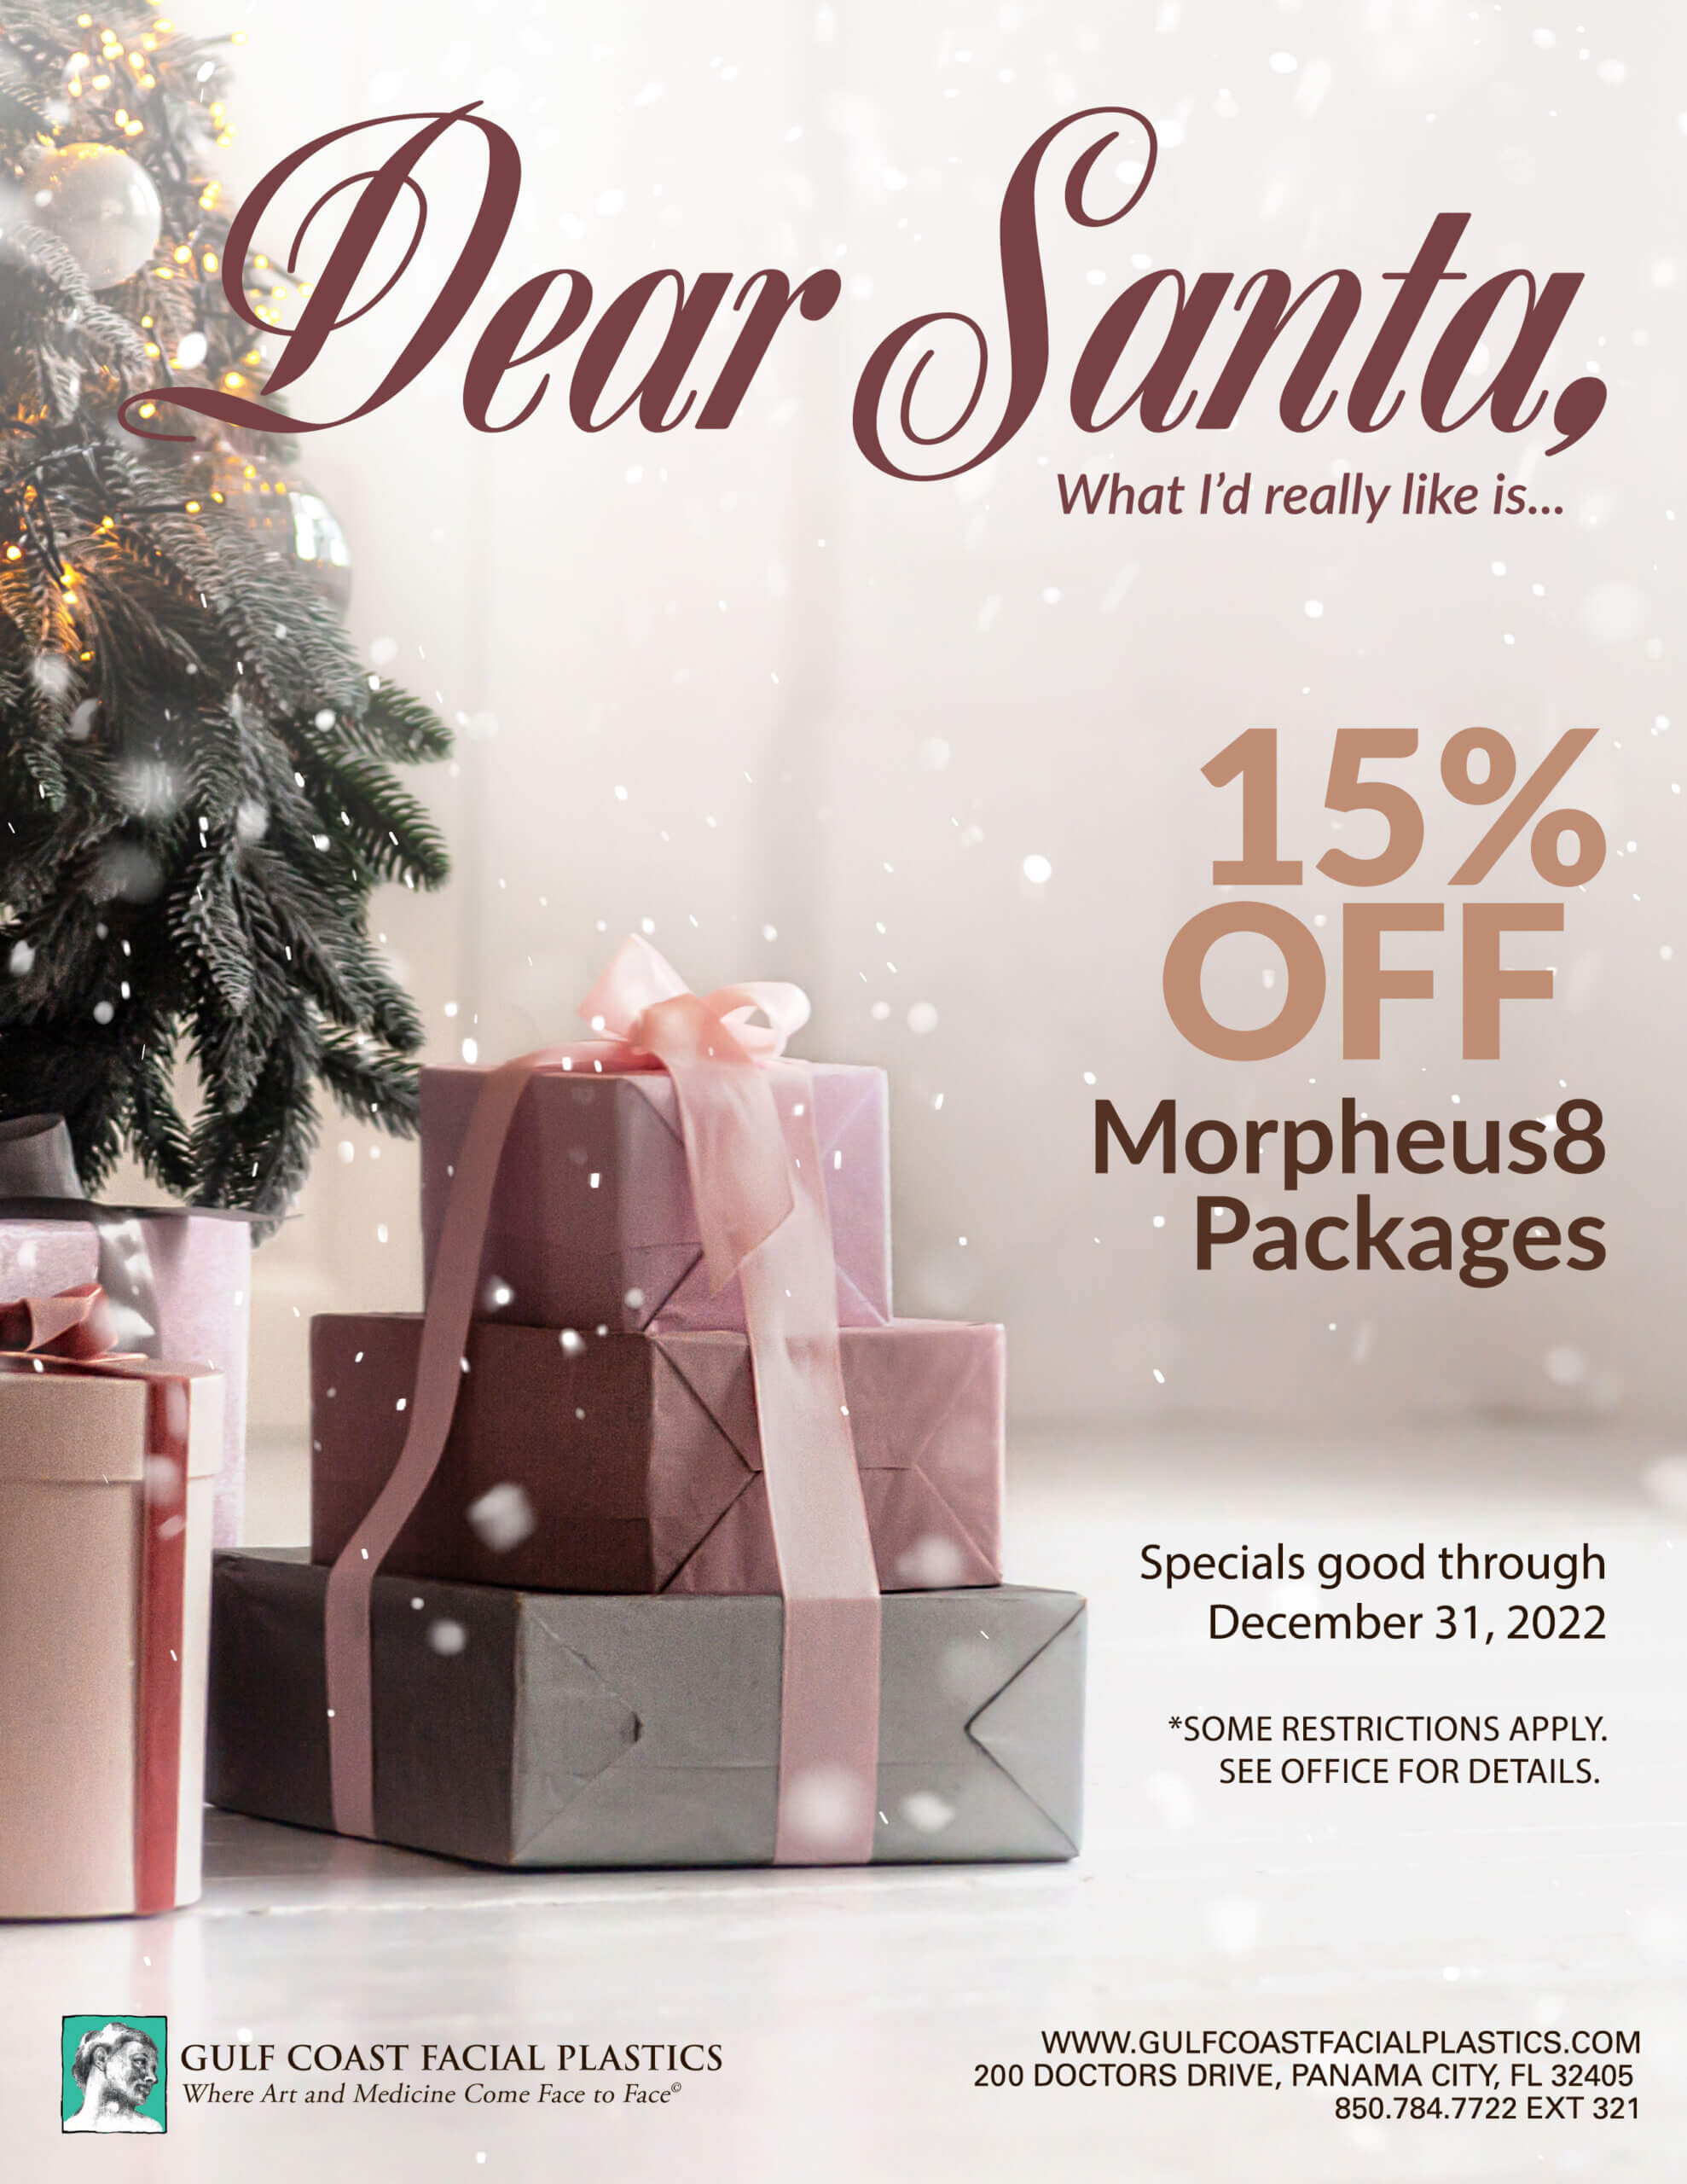 Dear Santa, what I'd really like is 15% OFF Morpheus8 Packages. Special good through Dec. 31, 2022.